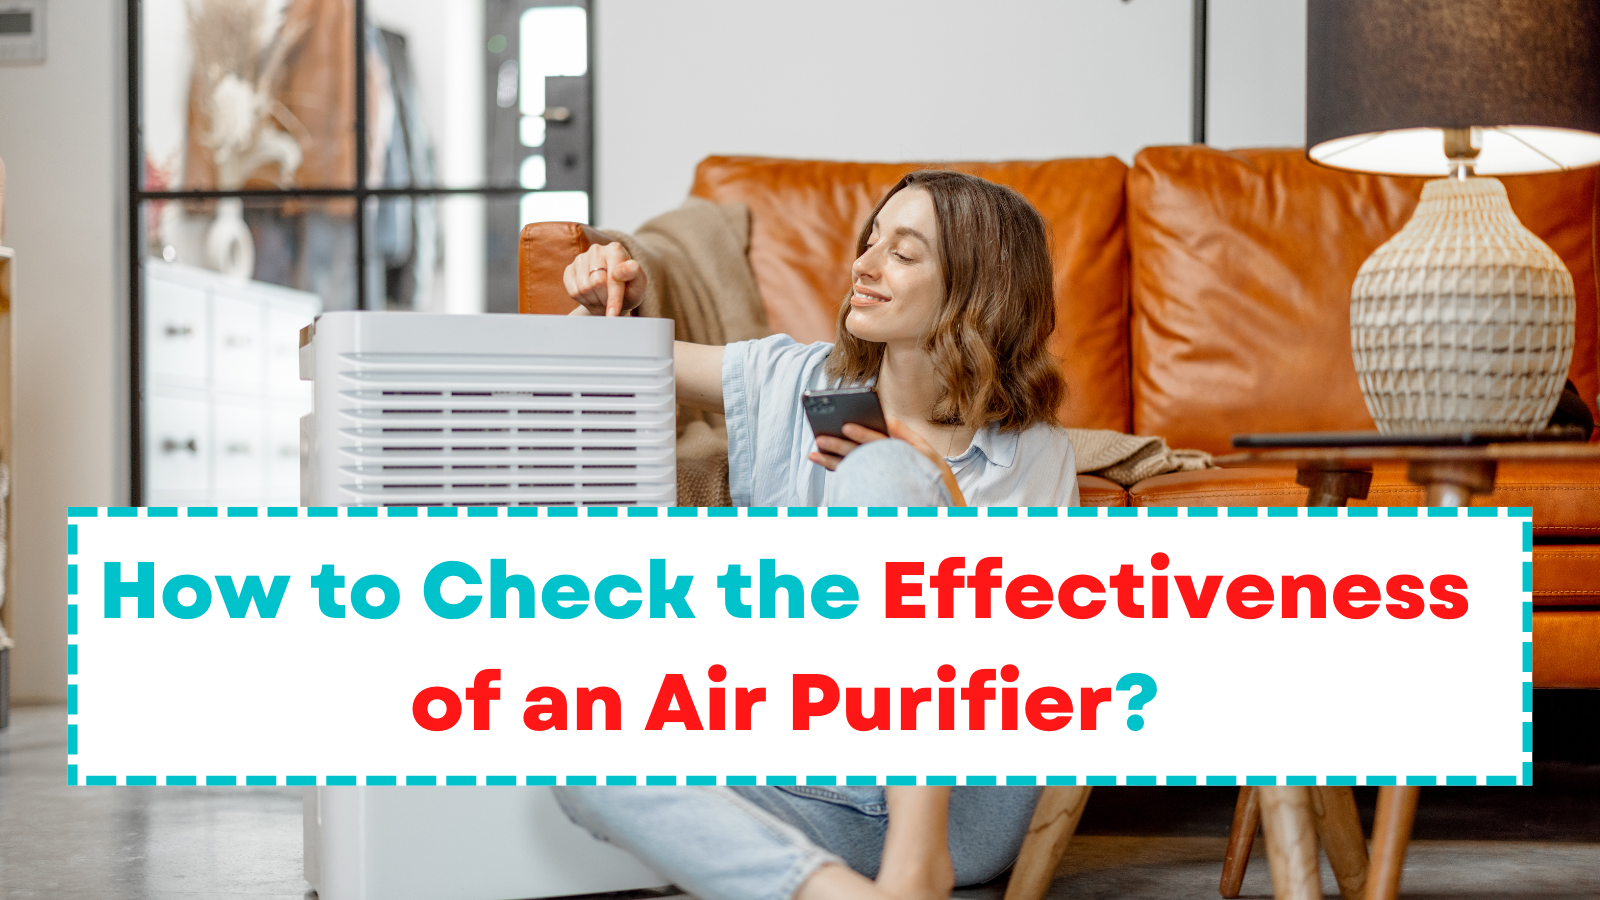 How to Сheck the Effectiveness of an Air Purifier?